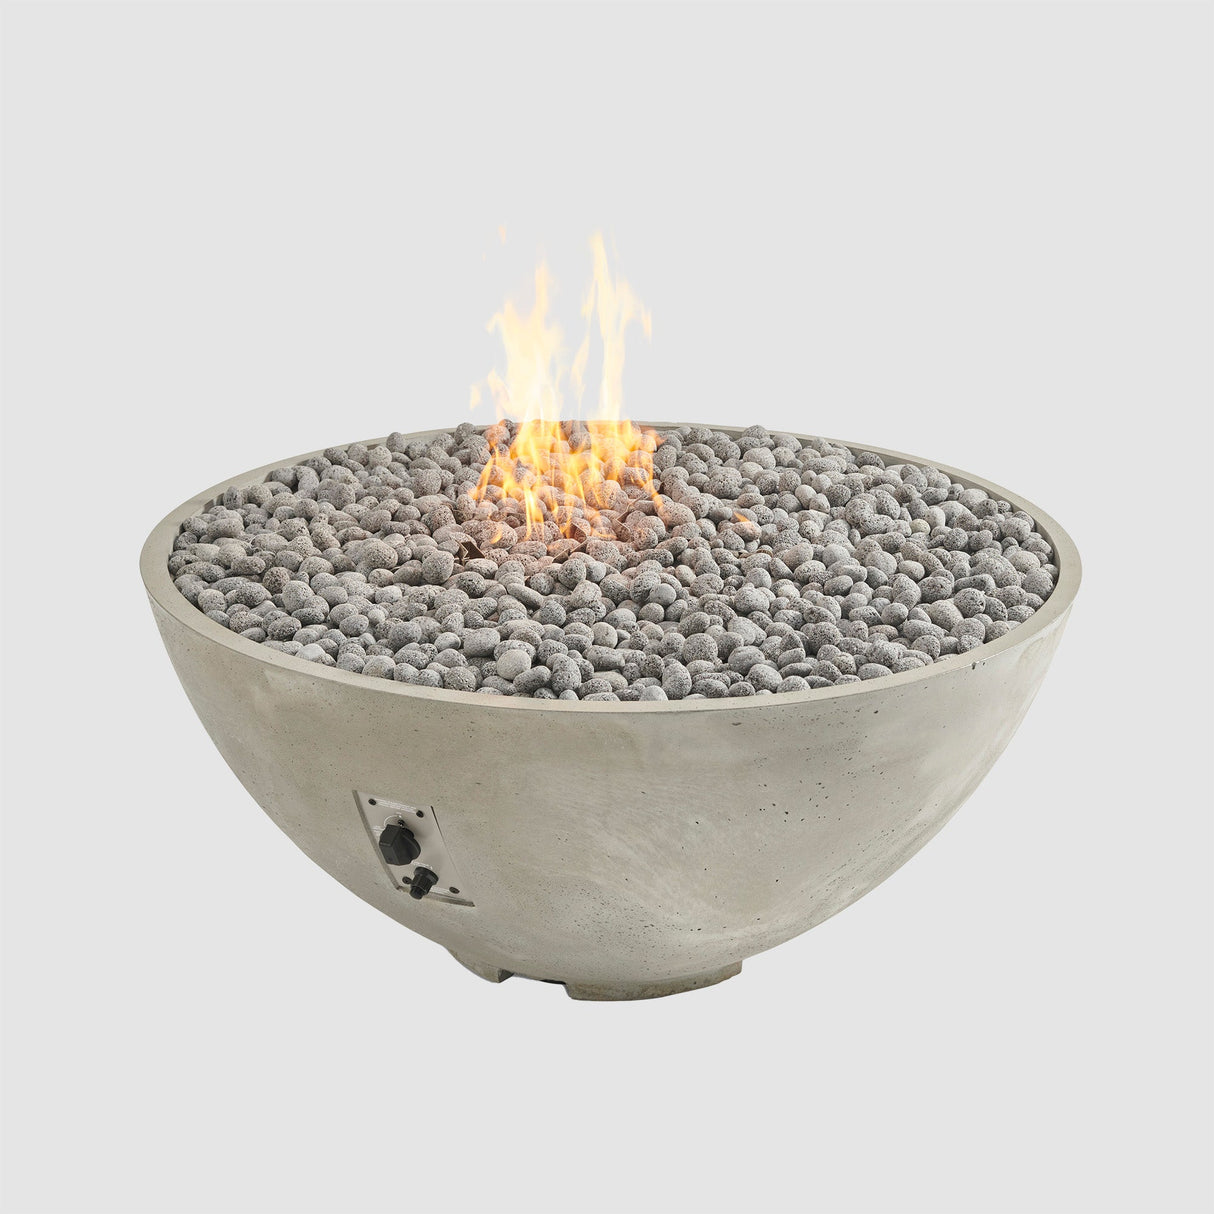 Lava rocks and a large flame coming from a Natural Grey Cove Edge Round Gas Fire Pit Bowl 42"